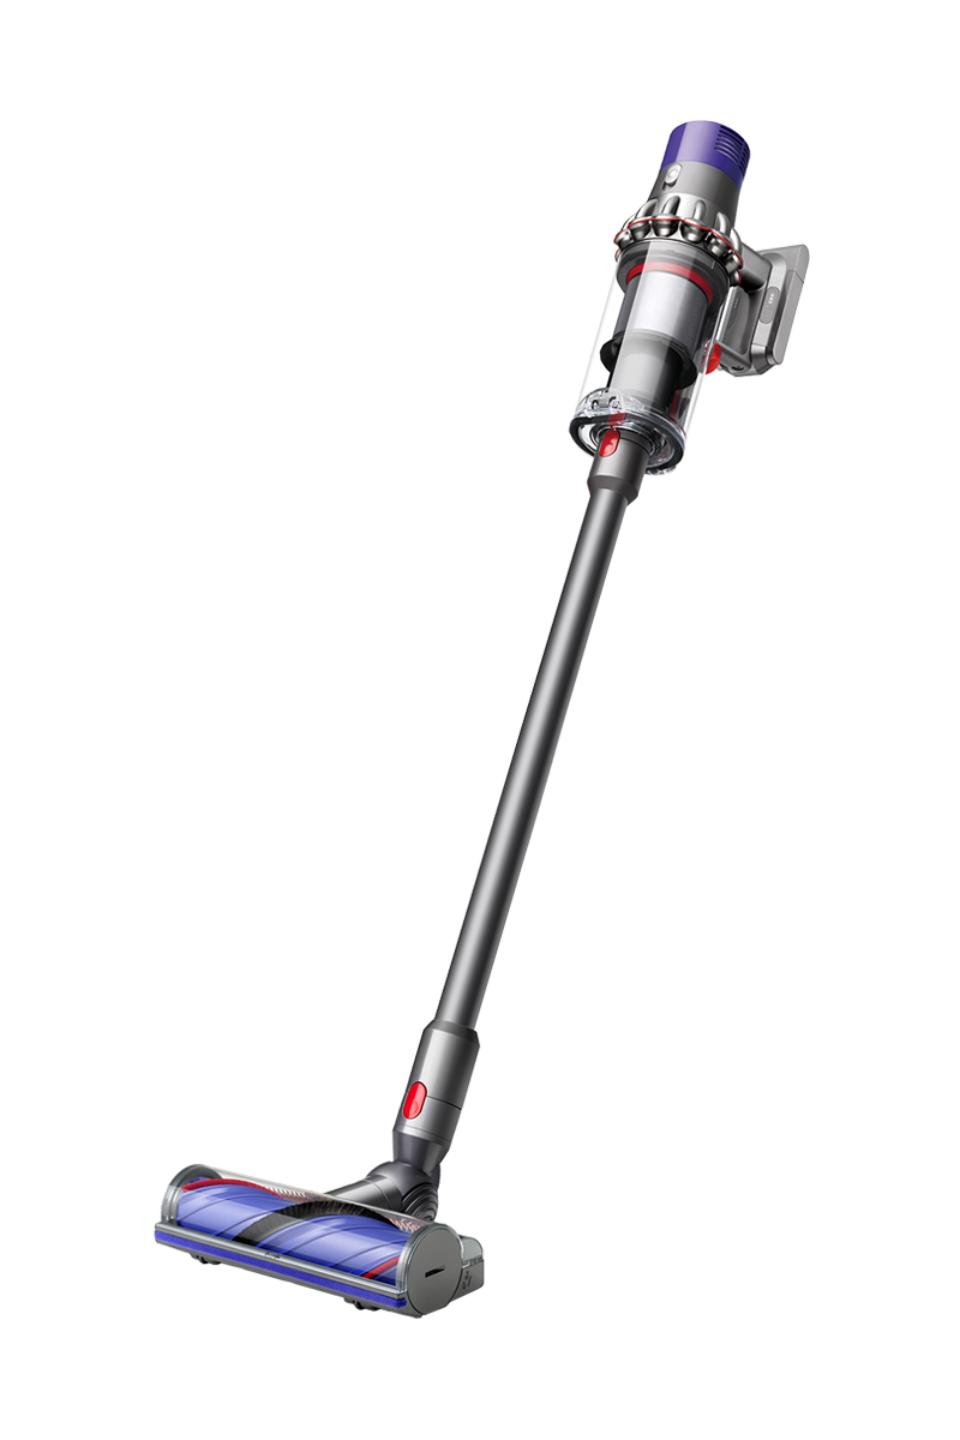 Dyson V8 vs. V10: The difference between the two cordless